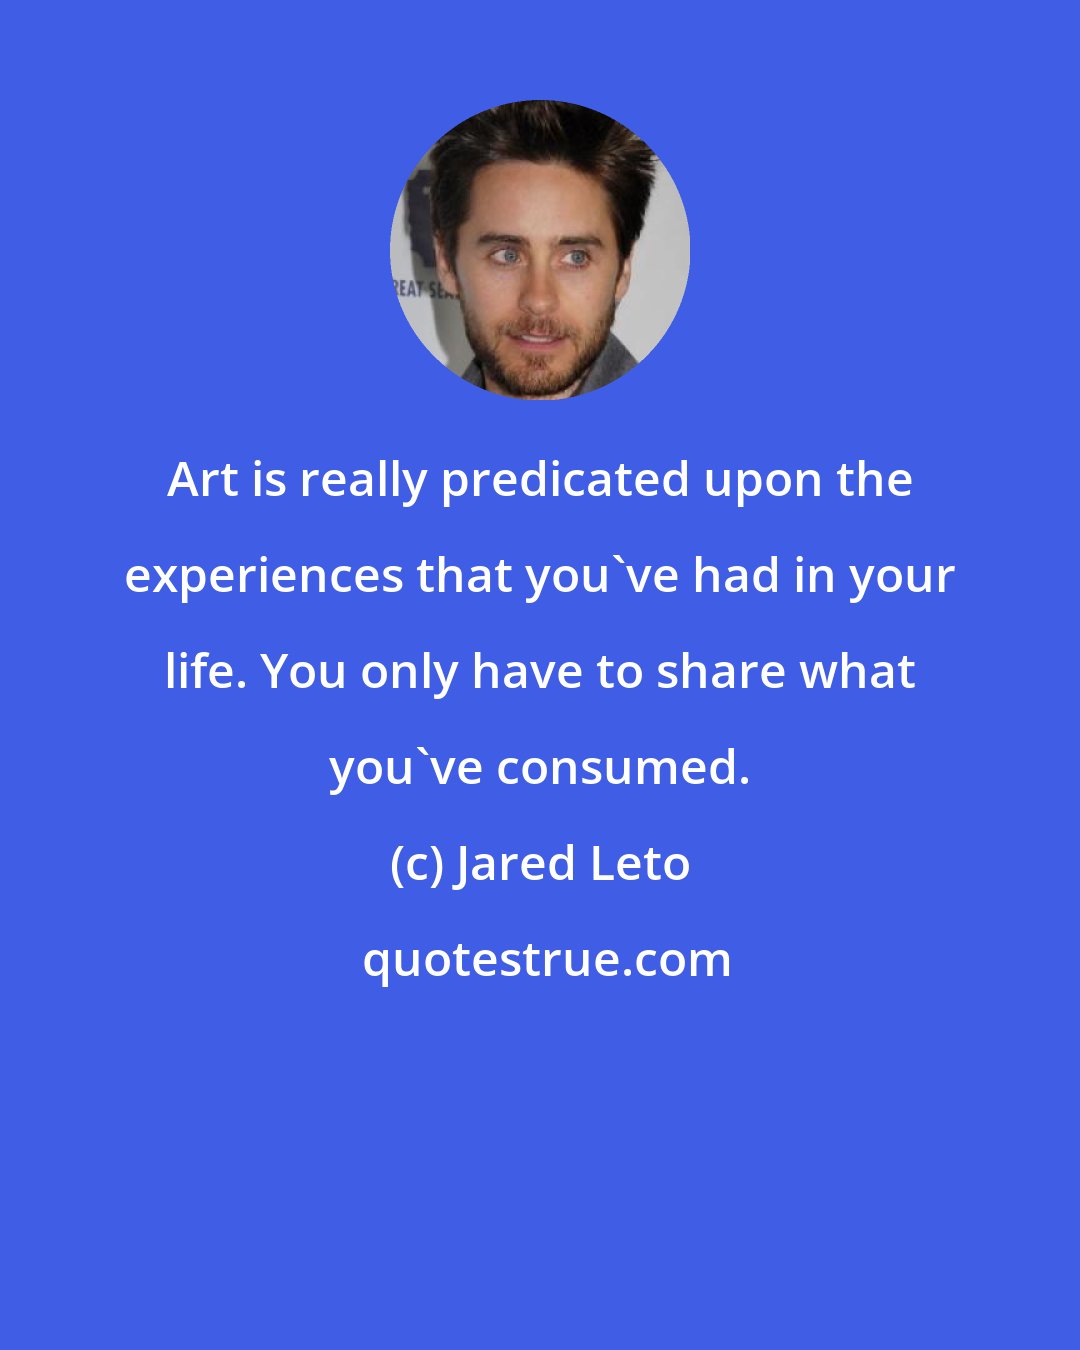 Jared Leto: Art is really predicated upon the experiences that you've had in your life. You only have to share what you've consumed.